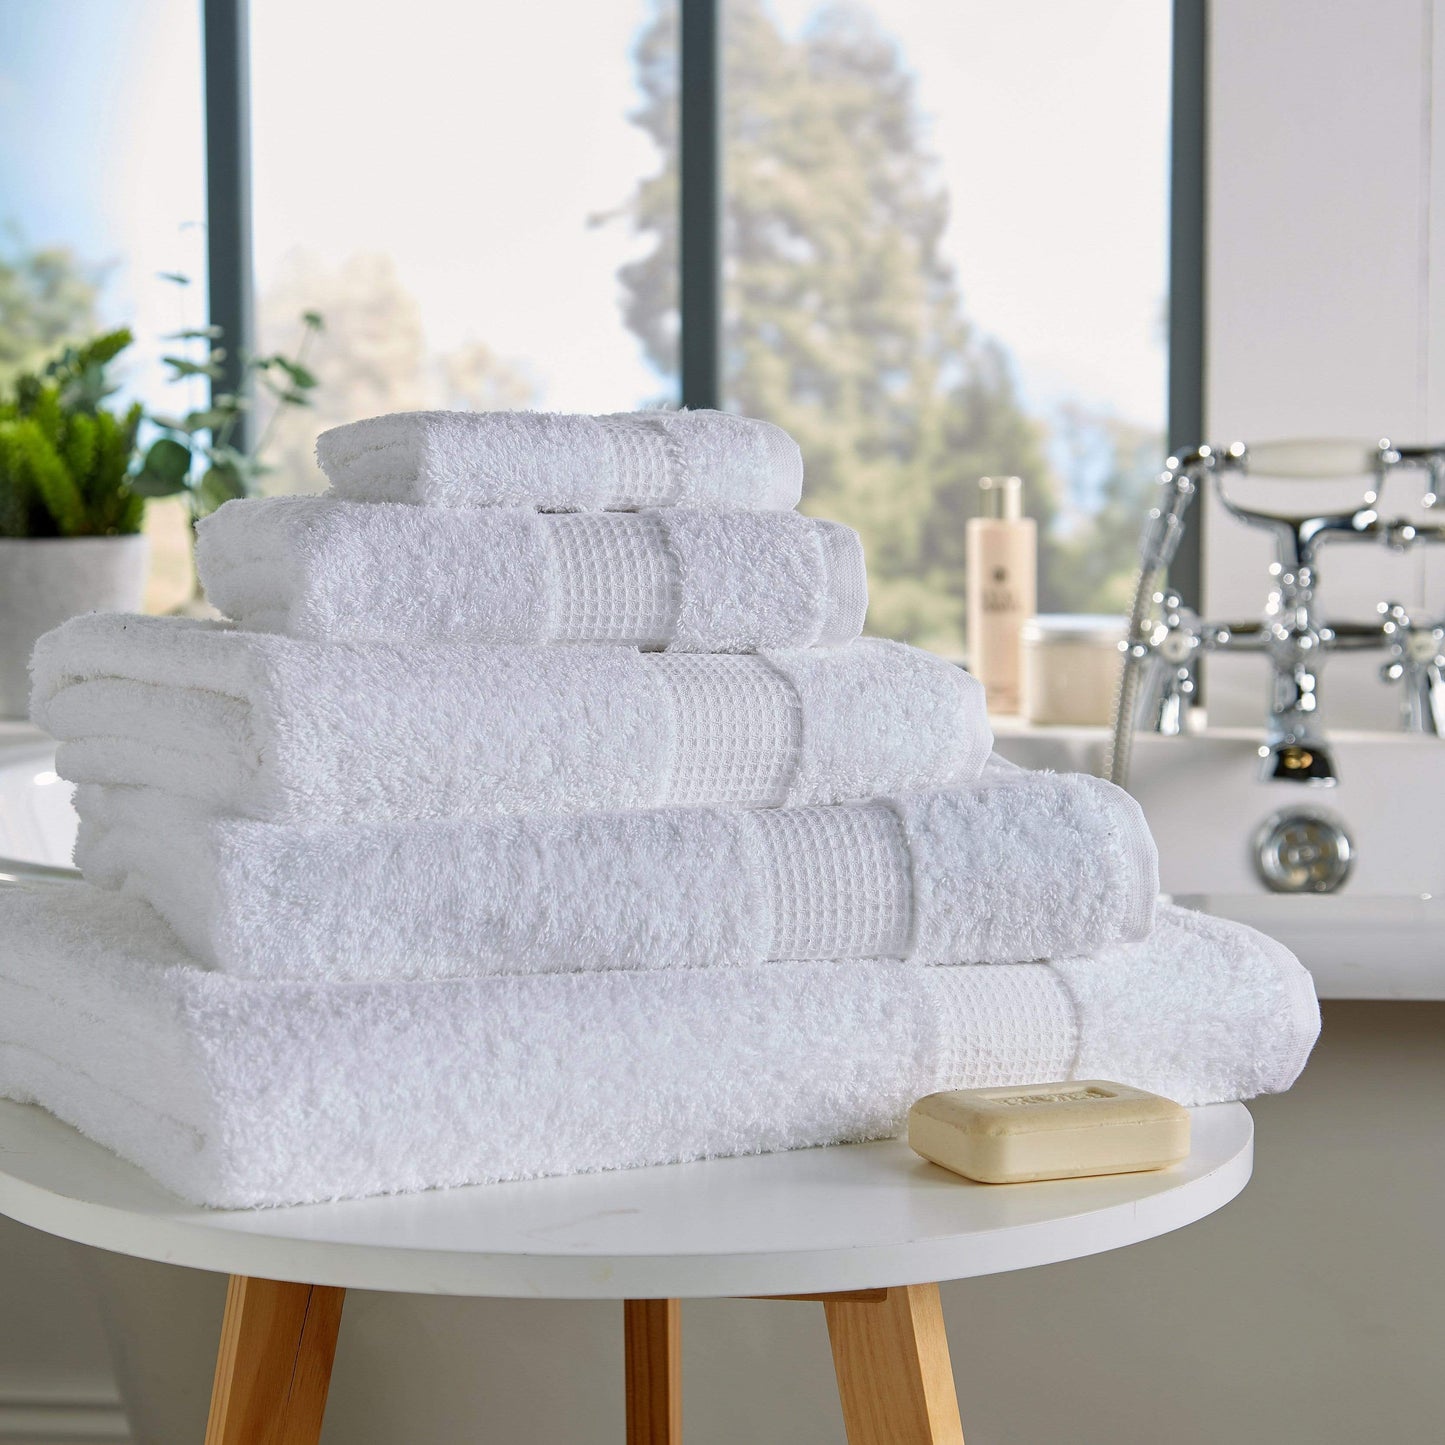 Luxurious egyptian cotton towels made in Portugal. - 1005085423396